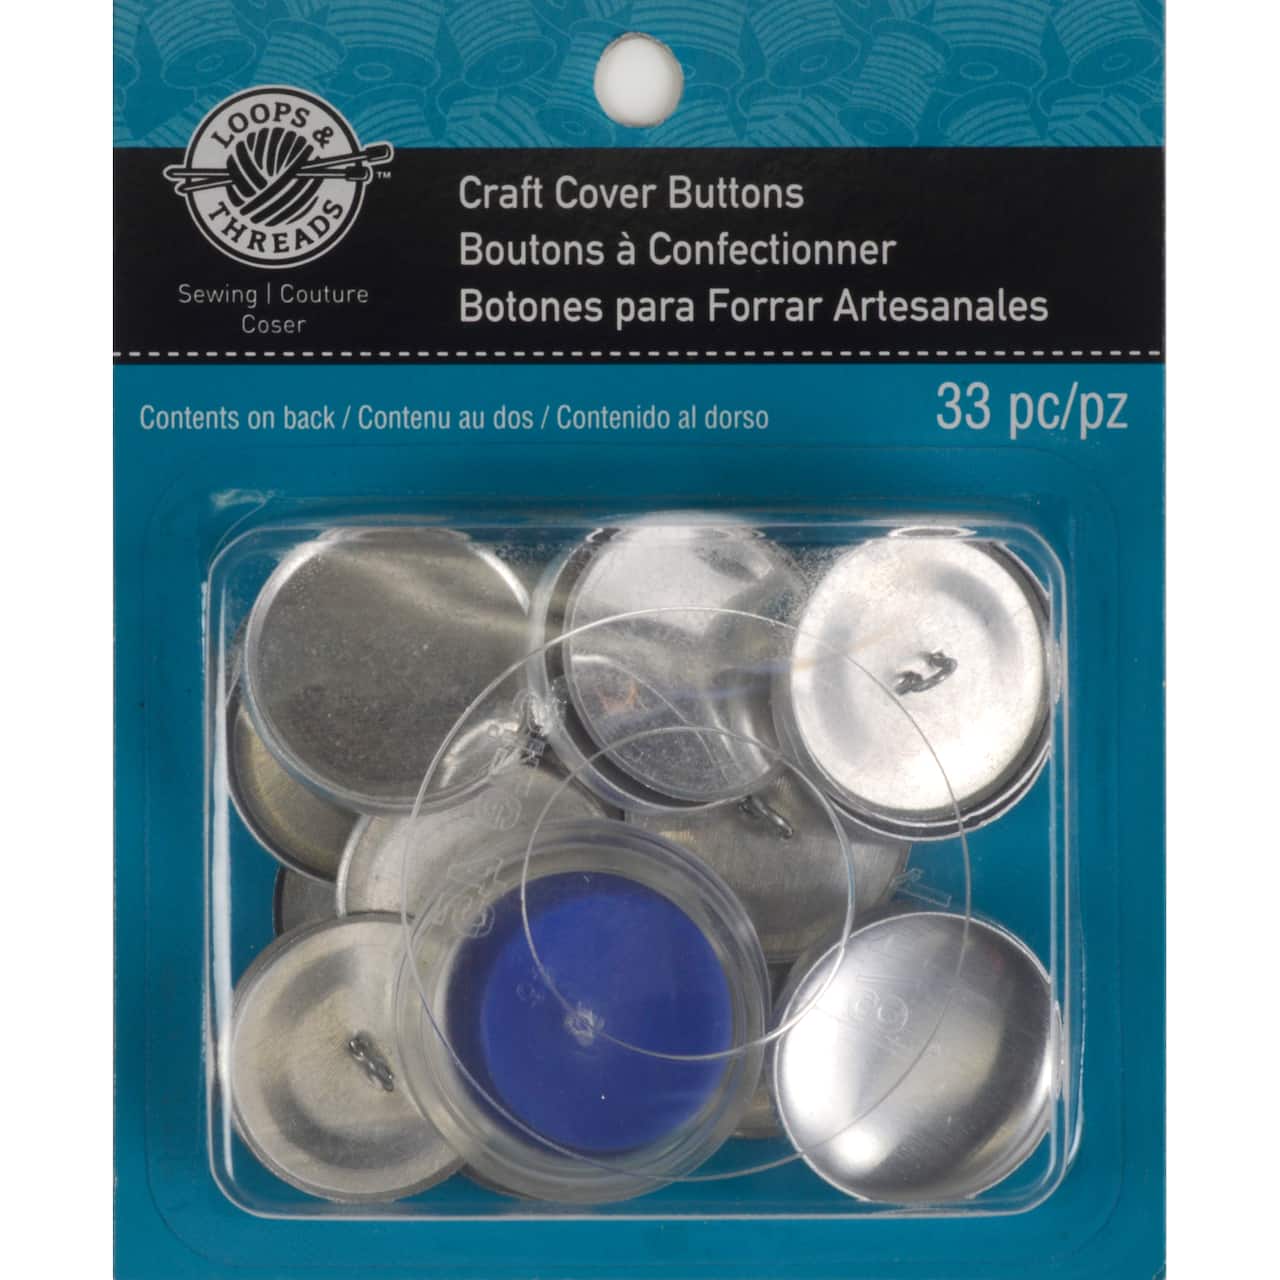 12 Pack: Craft Cover Button Kit by Loops & Threads®